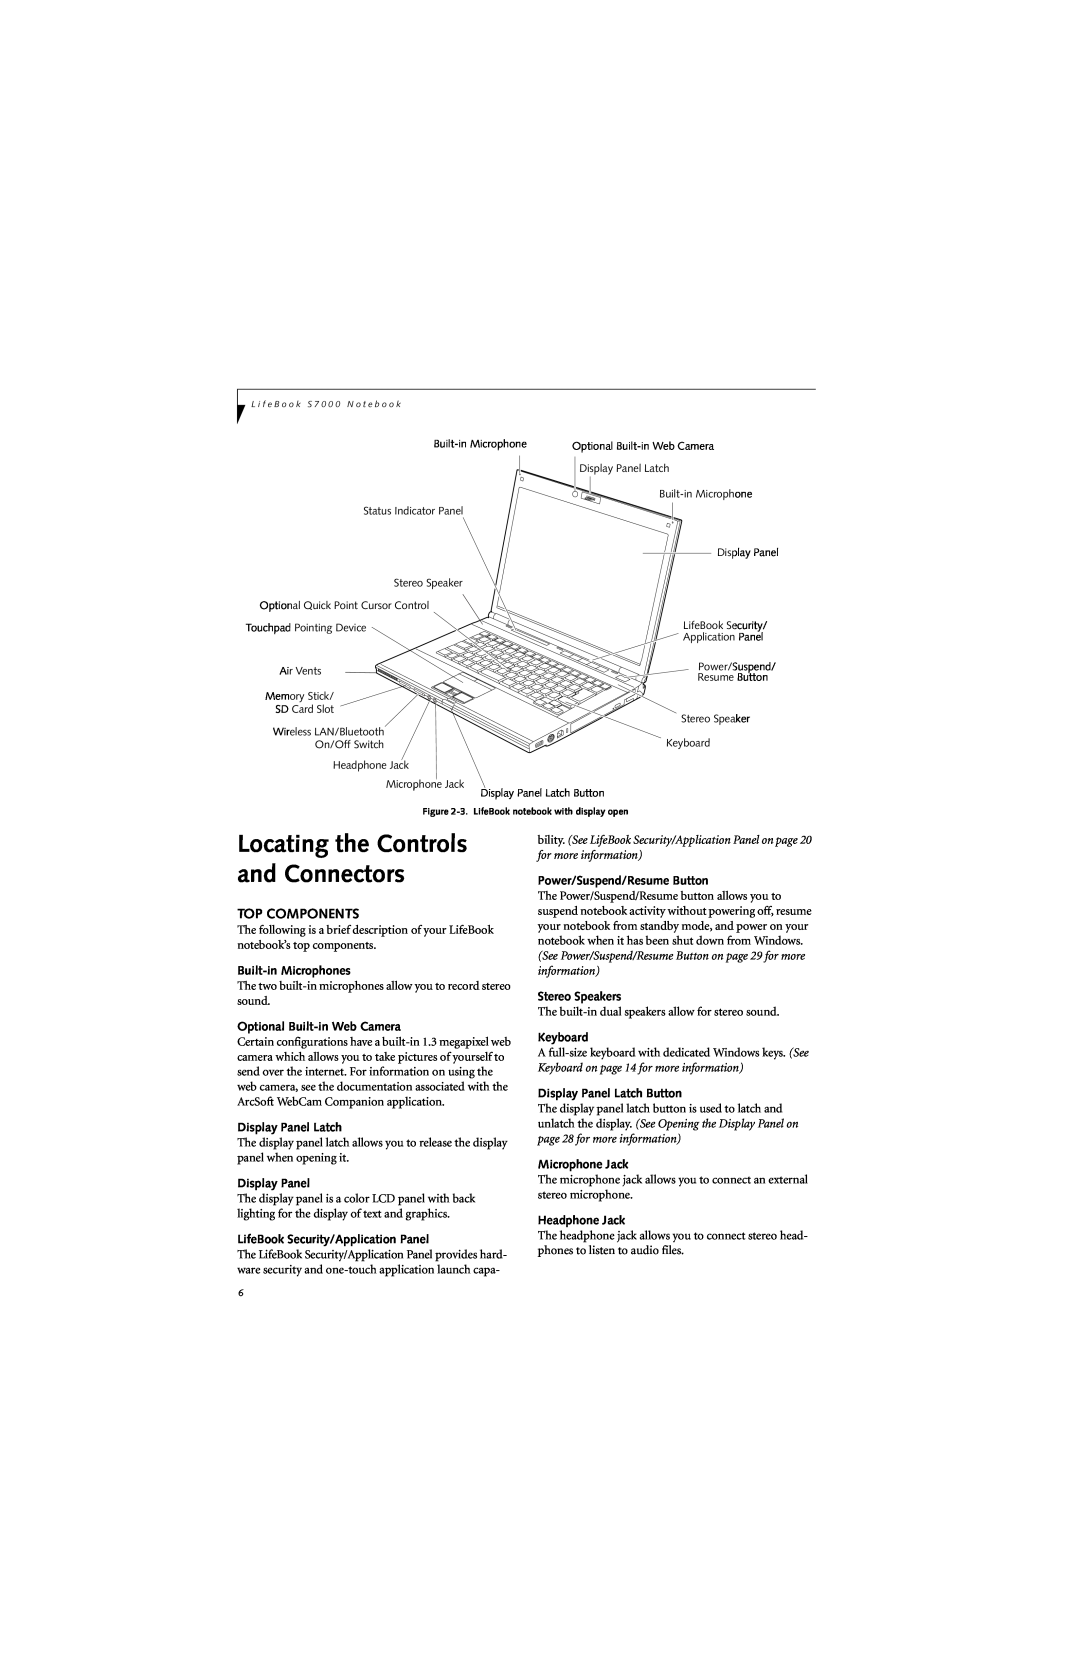 Fujitsu S7210 Locating the Controls and Connectors, Top Components, Built-in Microphones, Optional Built-in Web Camera 